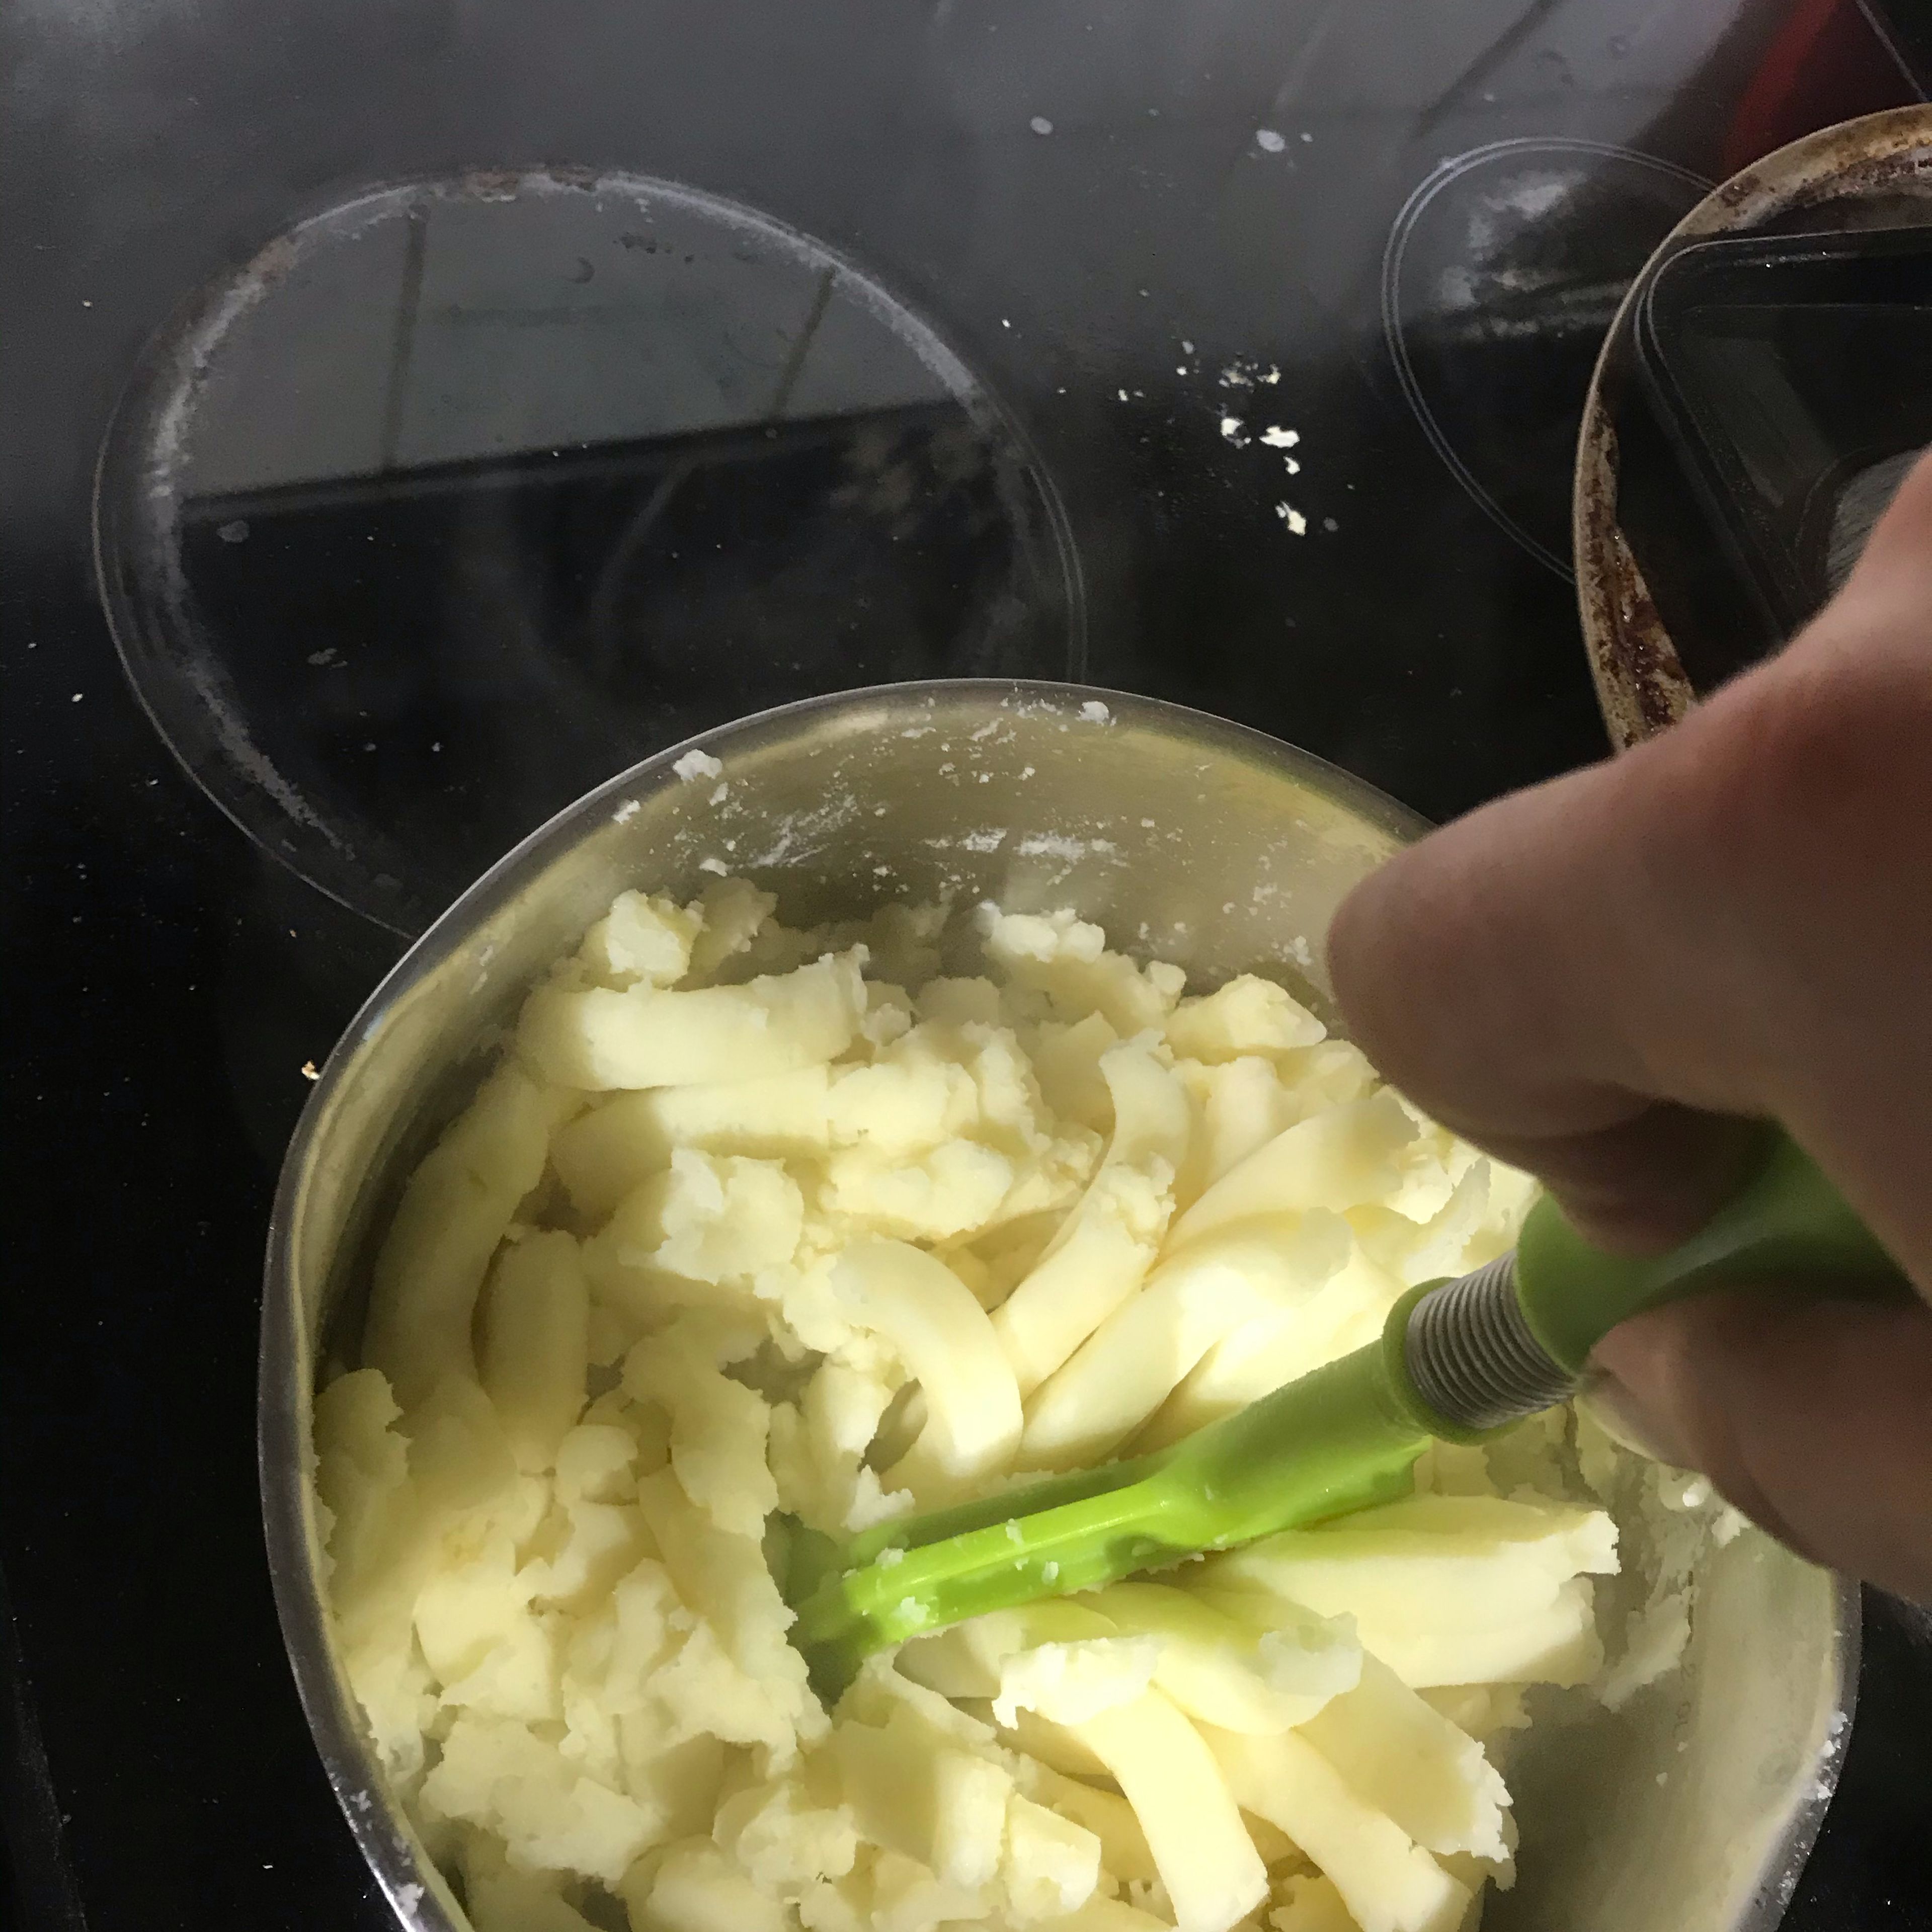 Drain, then mash potatoes with butter add milk until smooth.